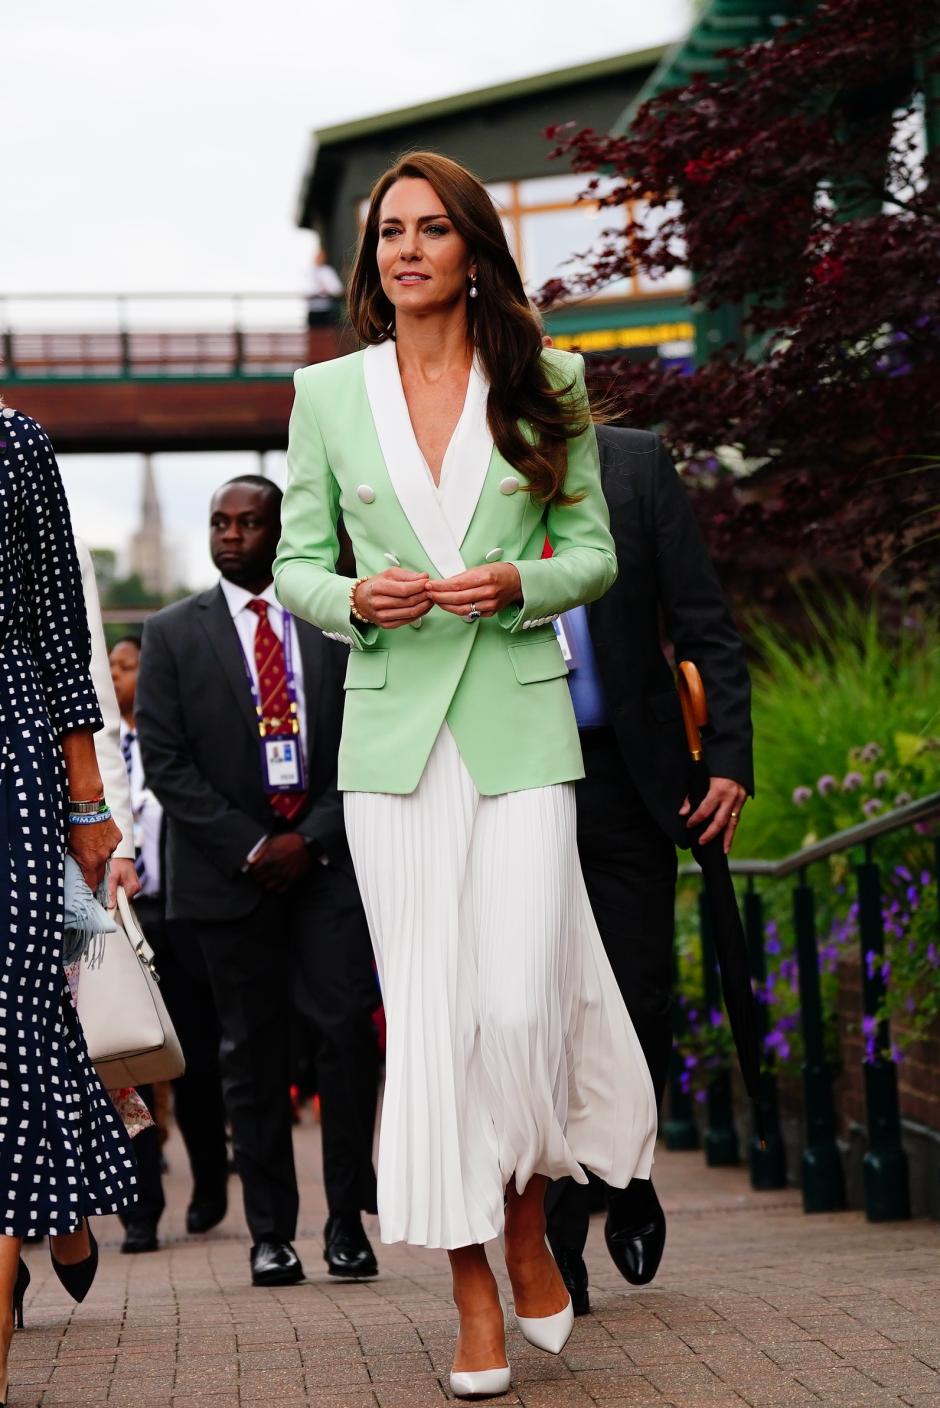 The Princess of Wales, Patron of the All England Lawn Tennis Club, arrives for day two of the 2023 Wimbledon Championships at the All England Lawn Tennis and Croquet Club in Wimbledon. Picture date: Tuesday July 4, 2023. 
Wearing Balmain